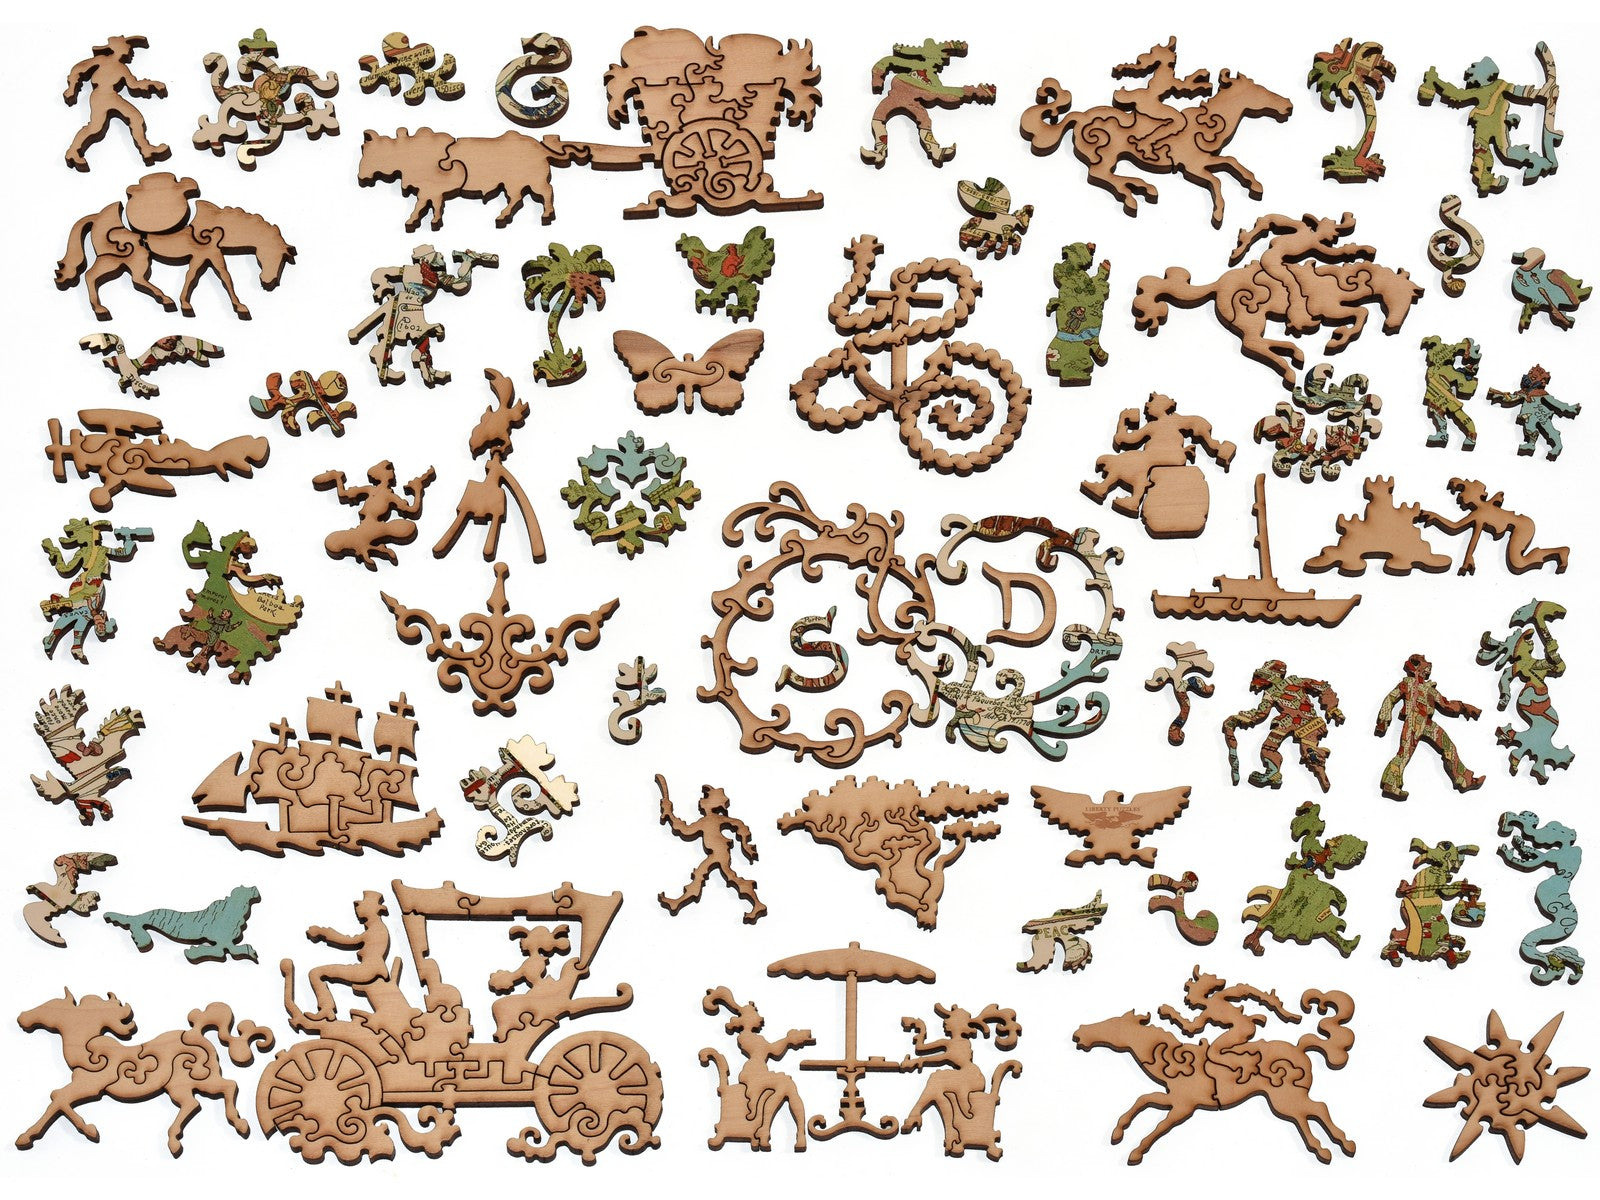 The whimsies that can be found in the puzzle, A Whimsical Map of San Diego.